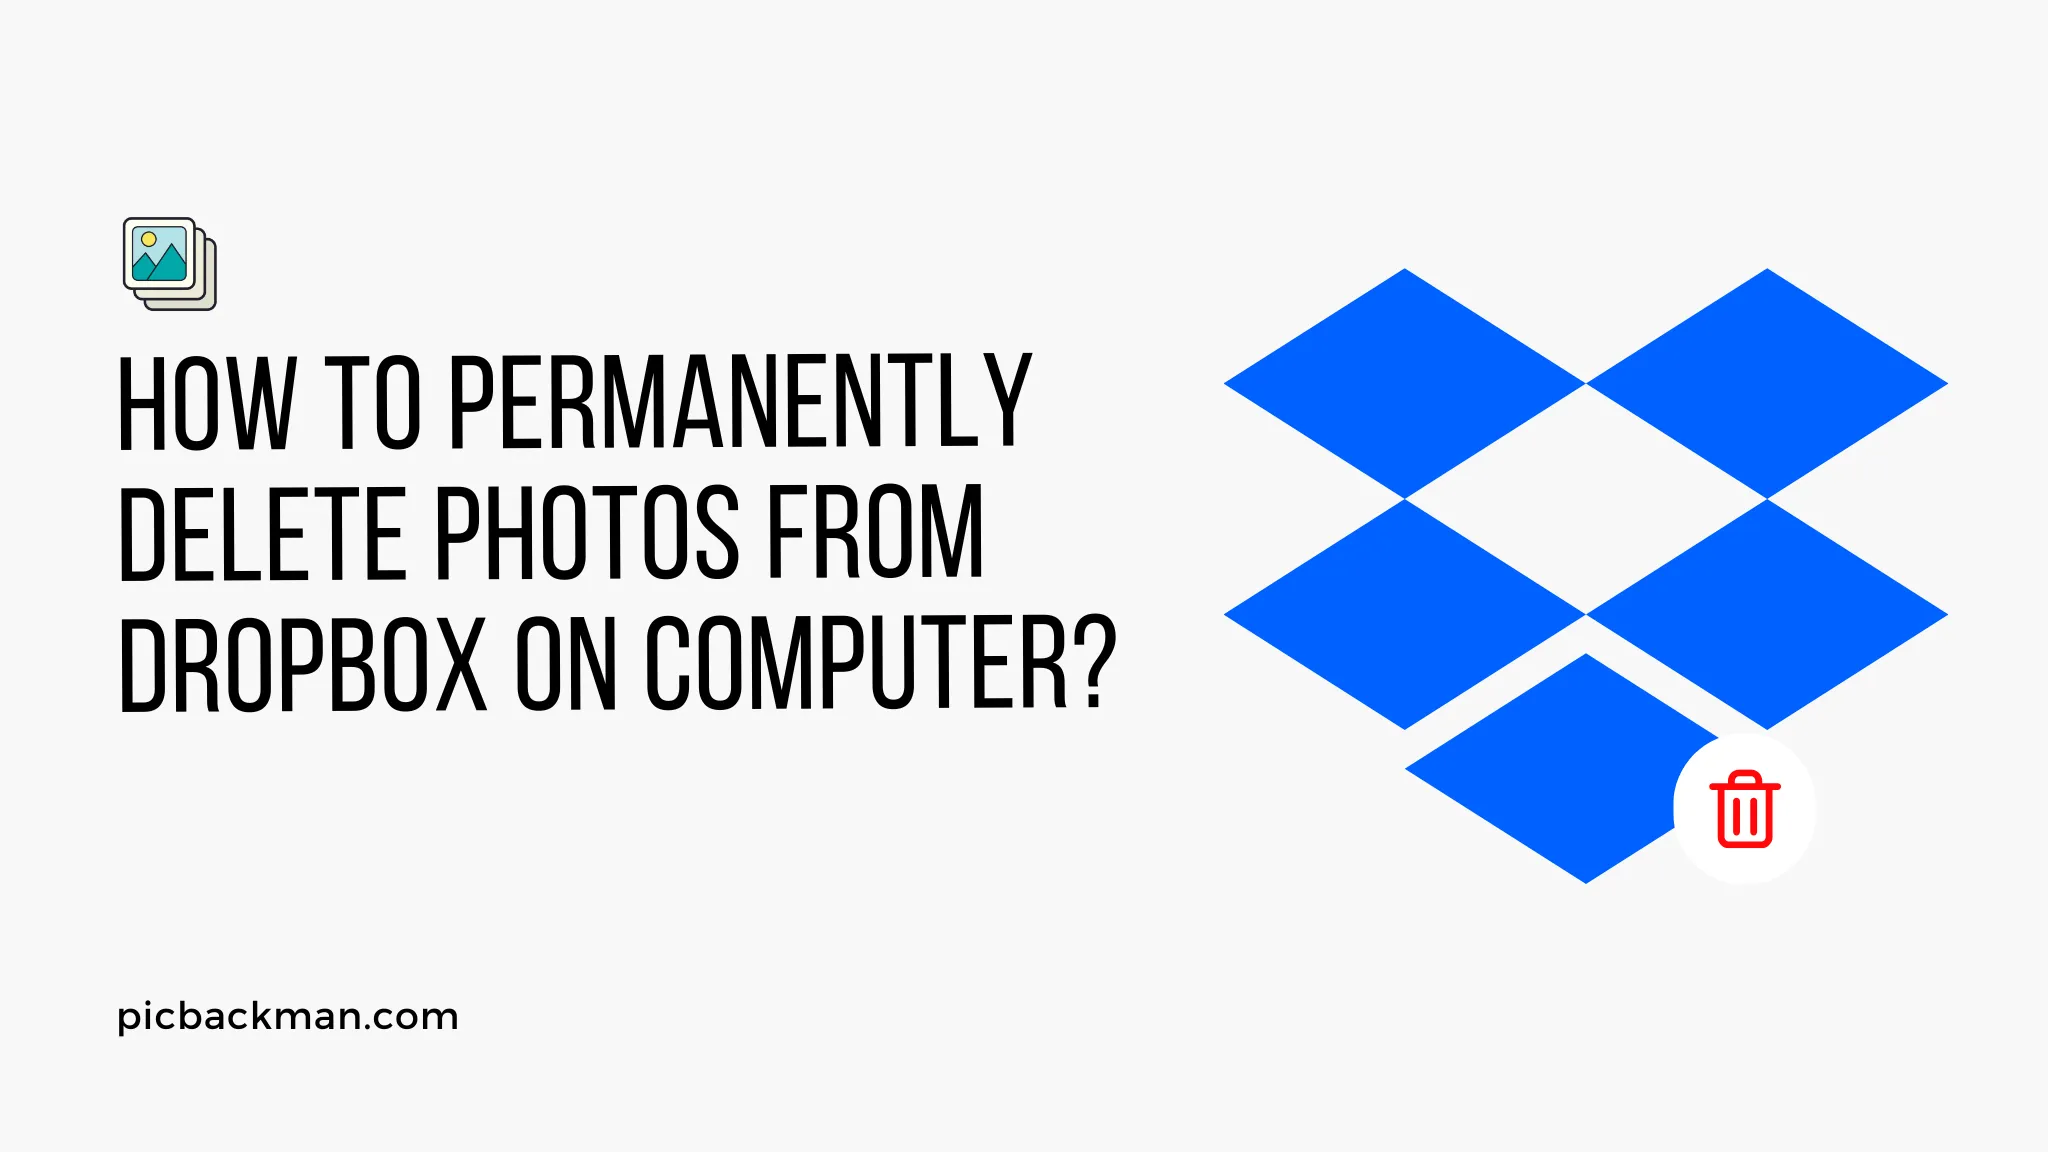 How to Permanently Delete Photos from Dropbox on Computer